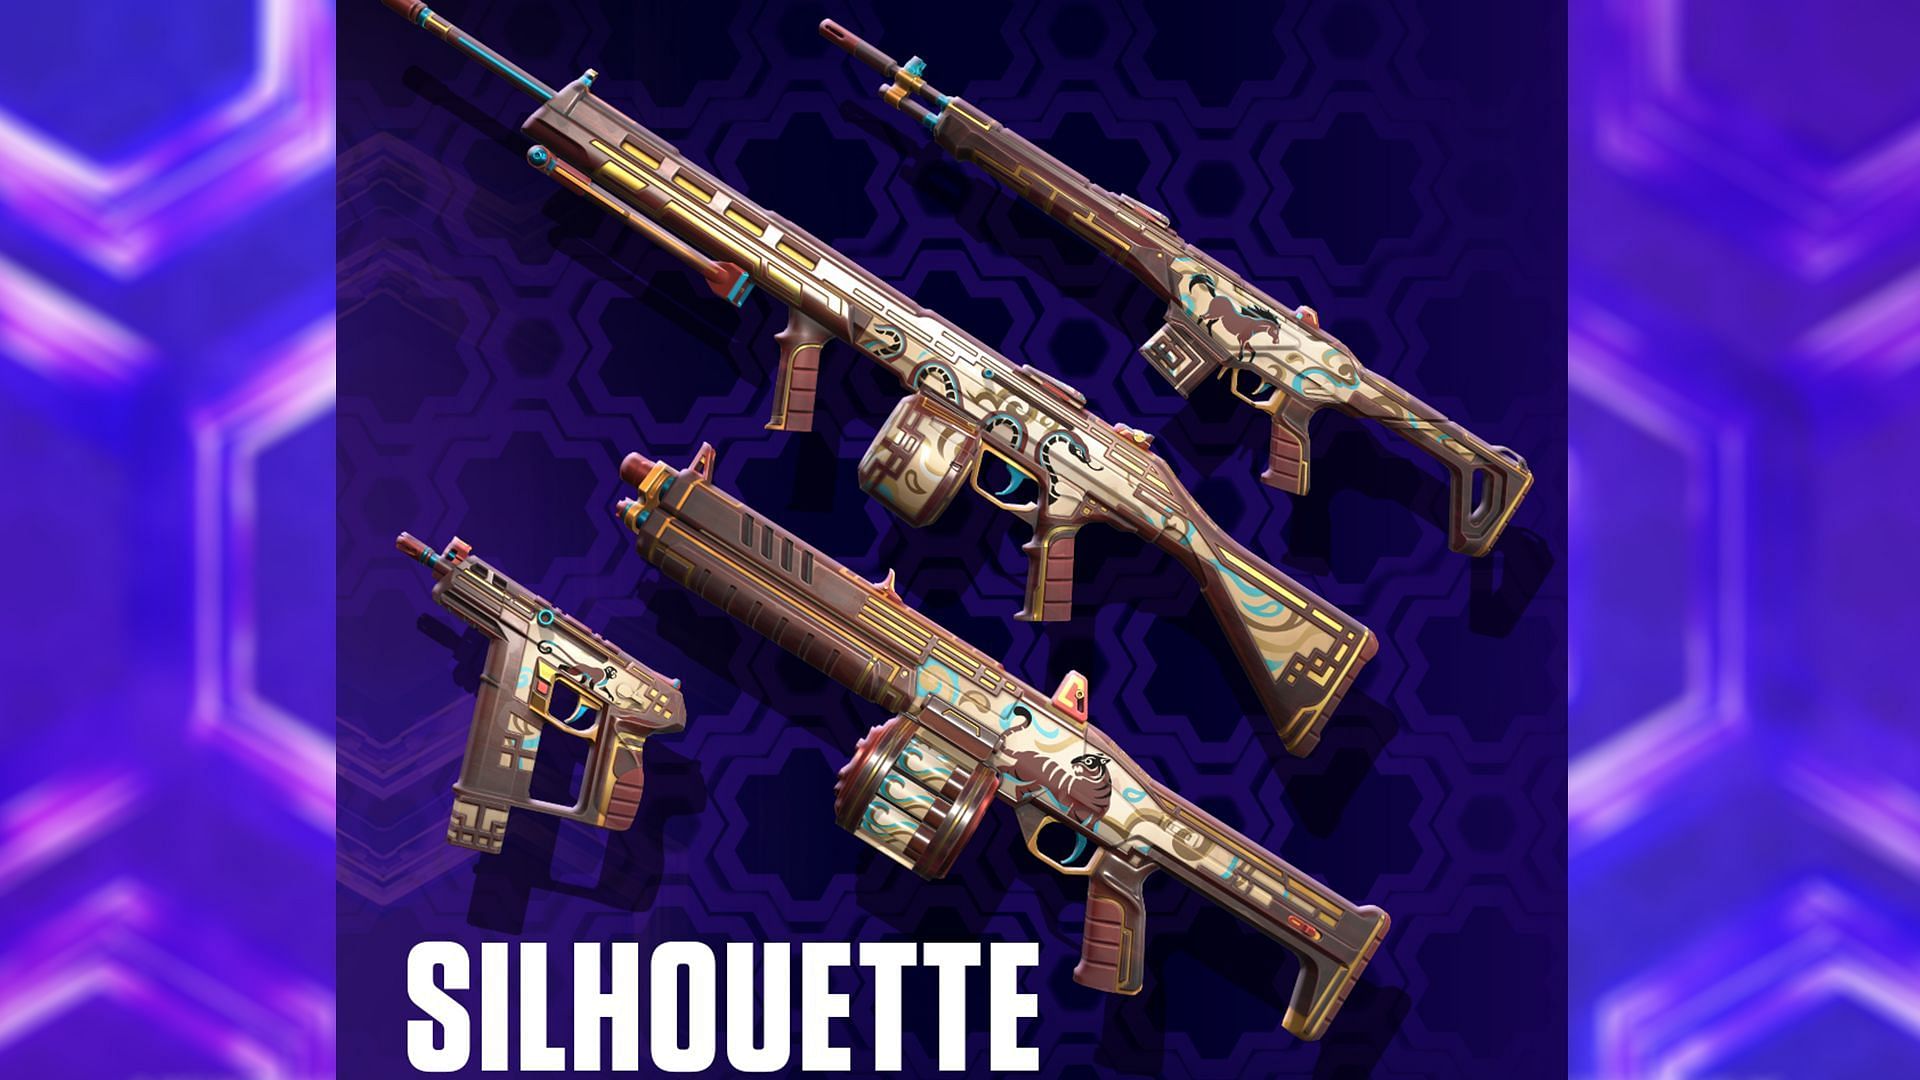 Valorant Episode 7 Act 3 Battlepass Silhouette collection details (Image via Riot Games)